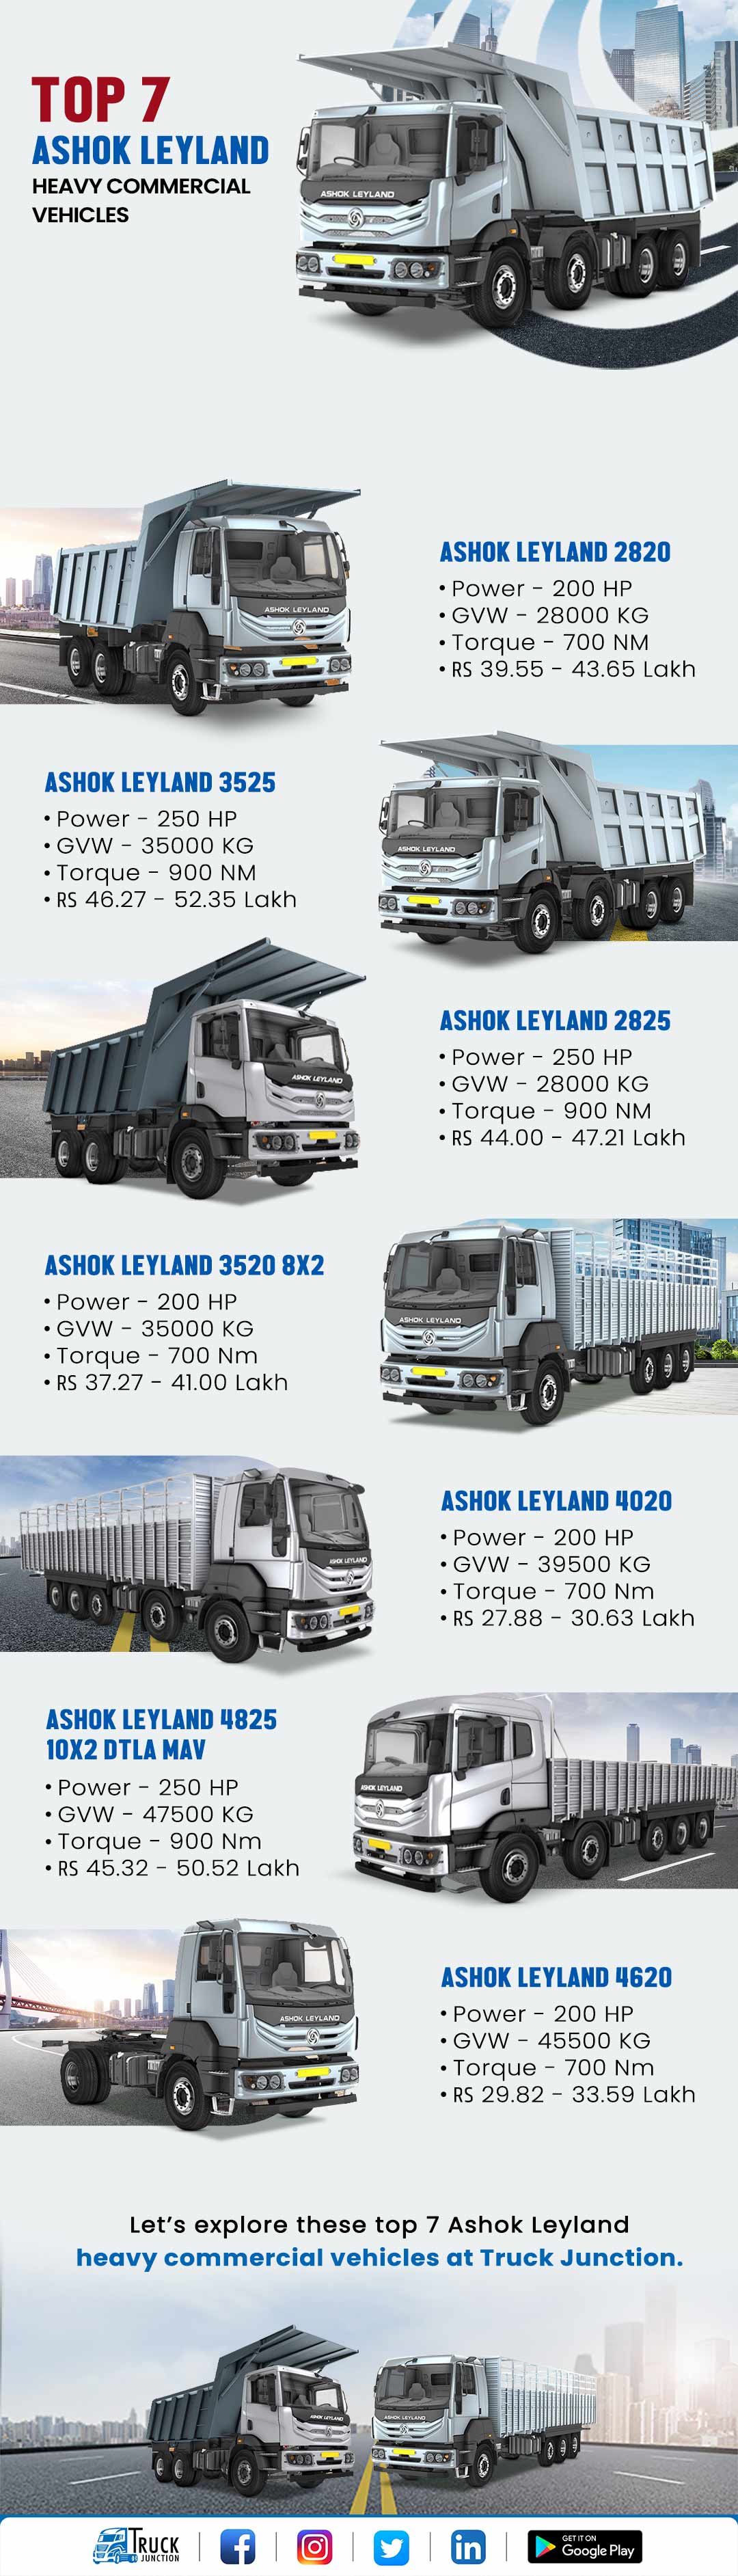 List of 7 Ashok Leyland Heavy Commercial Vehicles In India - Infographic